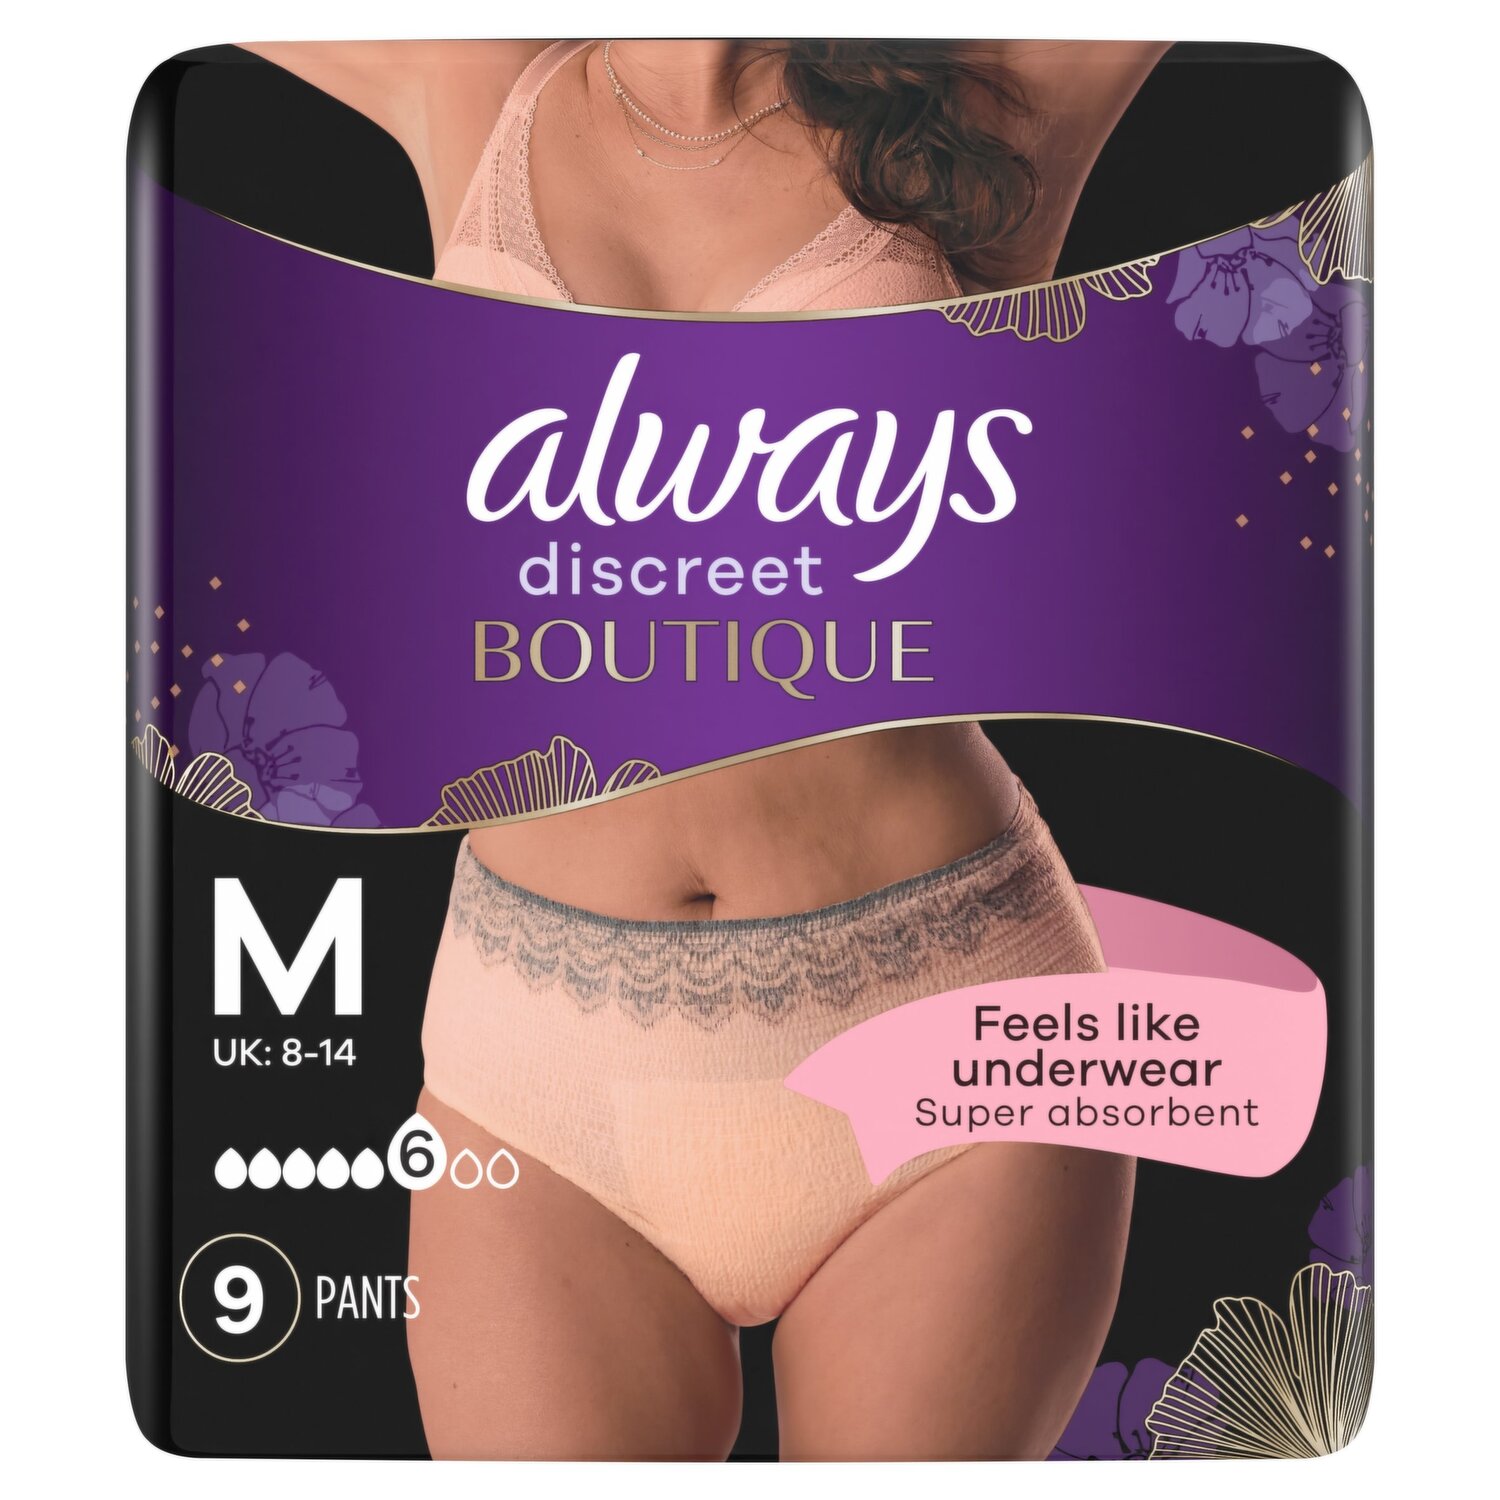 Dunns Clothing  Underneath It All: Browse Our Ladies Underwear